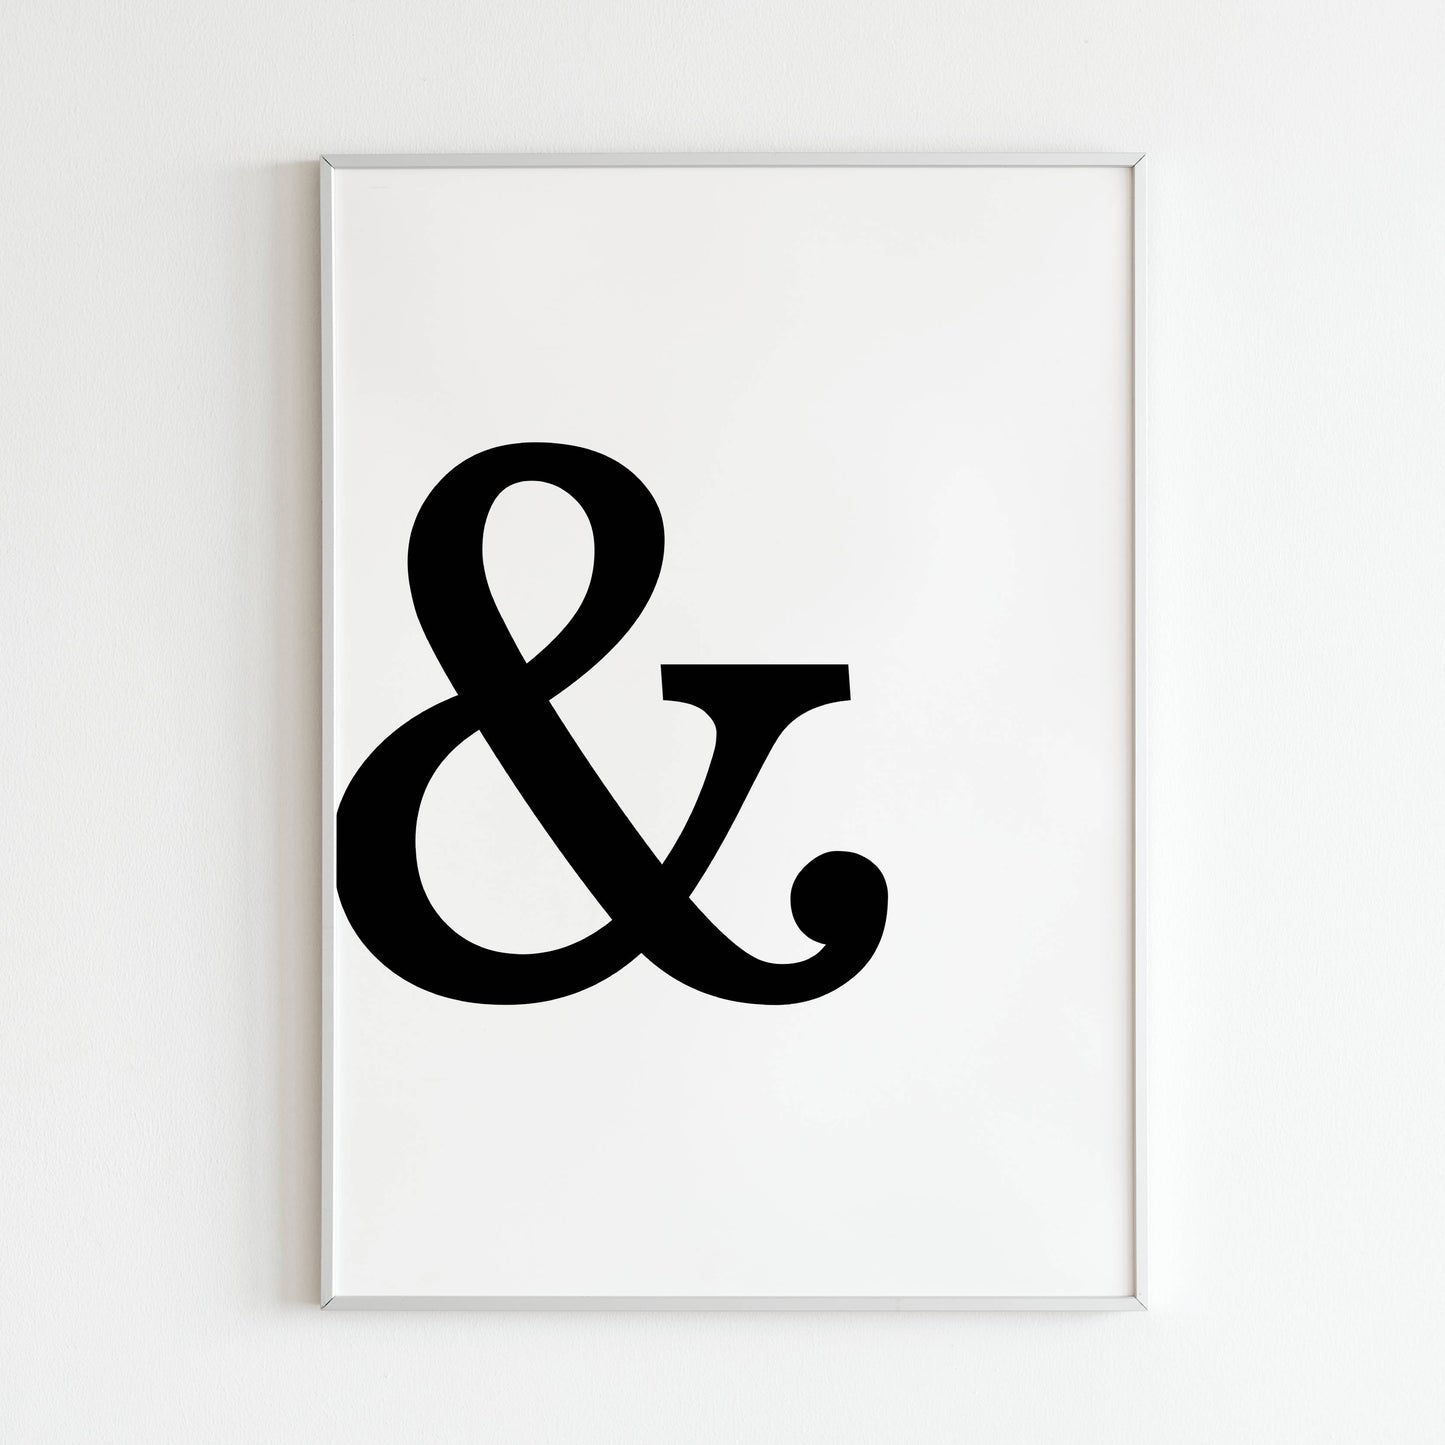 Downloadable "&" symbol art print, add a touch of ampersand love to your space.